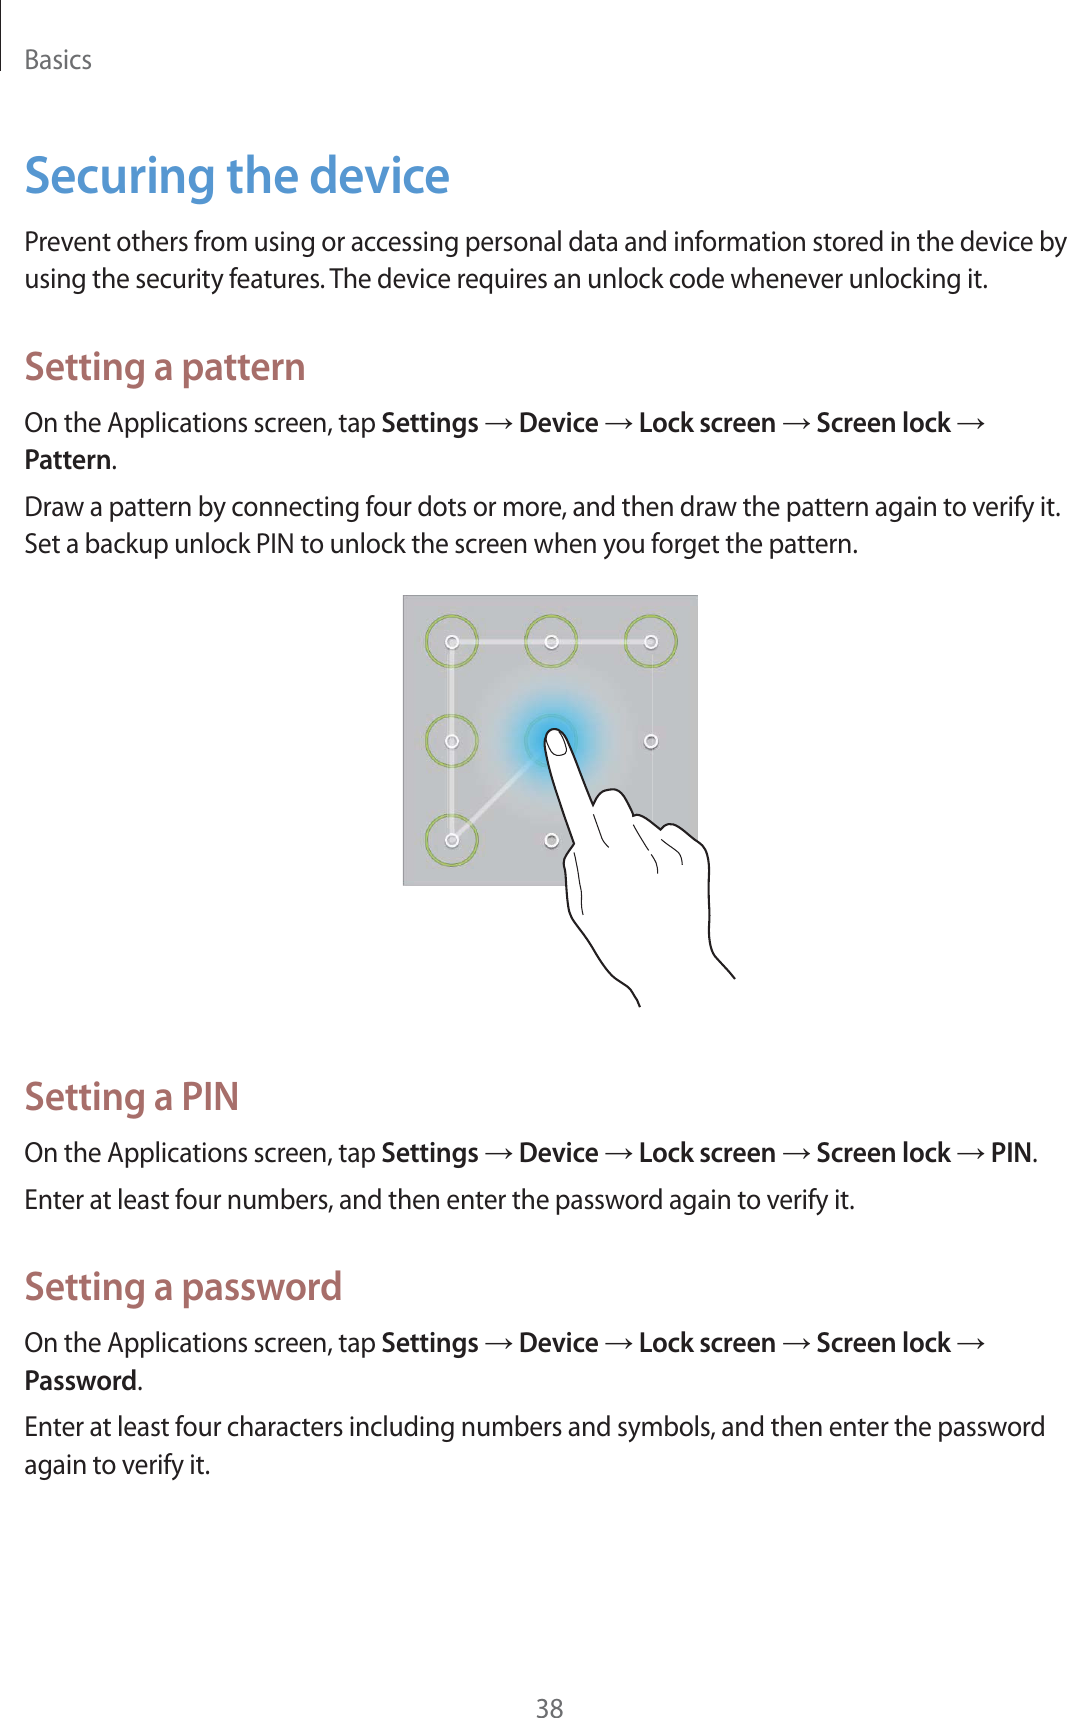 Basics38Securing the devicePrevent others from using or accessing personal data and information stored in the device by using the security features. The device requires an unlock code whenever unlocking it.Setting a patternOn the Applications screen, tap Settings ĺ Device ĺ Lock screen ĺ Screen lock ĺ Pattern.Draw a pattern by connecting four dots or more, and then draw the pattern again to verify it. Set a backup unlock PIN to unlock the screen when you forget the pattern.Setting a PINOn the Applications screen, tap Settings ĺ Device ĺ Lock screen ĺ Screen lock ĺ PIN.Enter at least four numbers, and then enter the password again to verify it.Setting a passwordOn the Applications screen, tap Settings ĺ Device ĺ Lock screen ĺ Screen lock ĺ Password.Enter at least four characters including numbers and symbols, and then enter the password again to verify it.